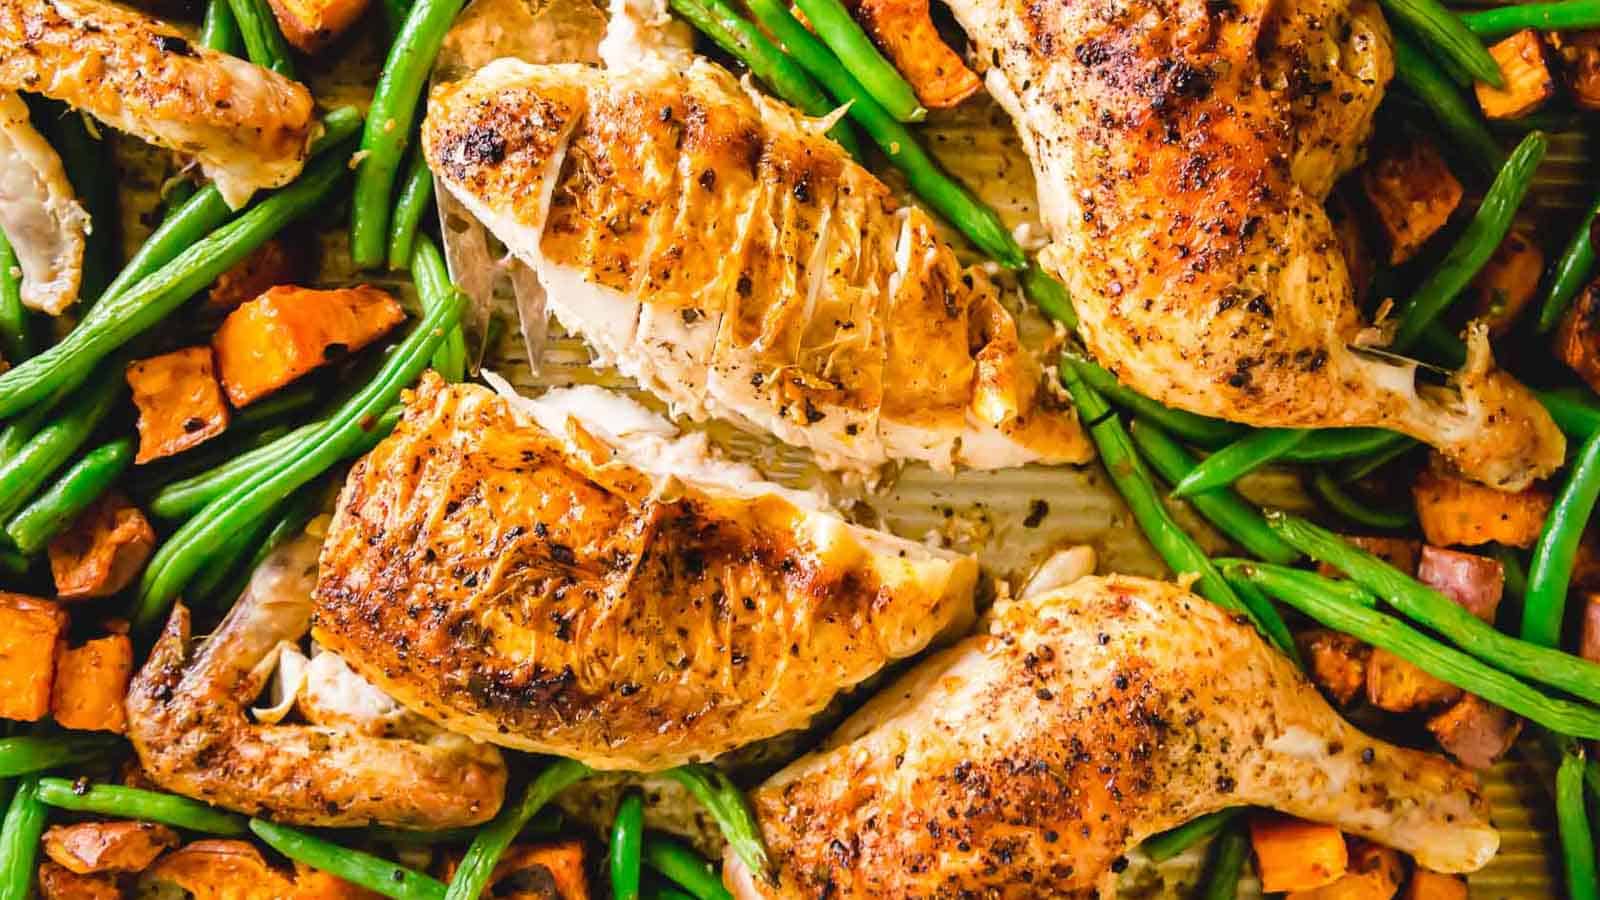 Spatchcock chicken with peri peri seasoning on a baking sheet with green beans and sweet potatoes.